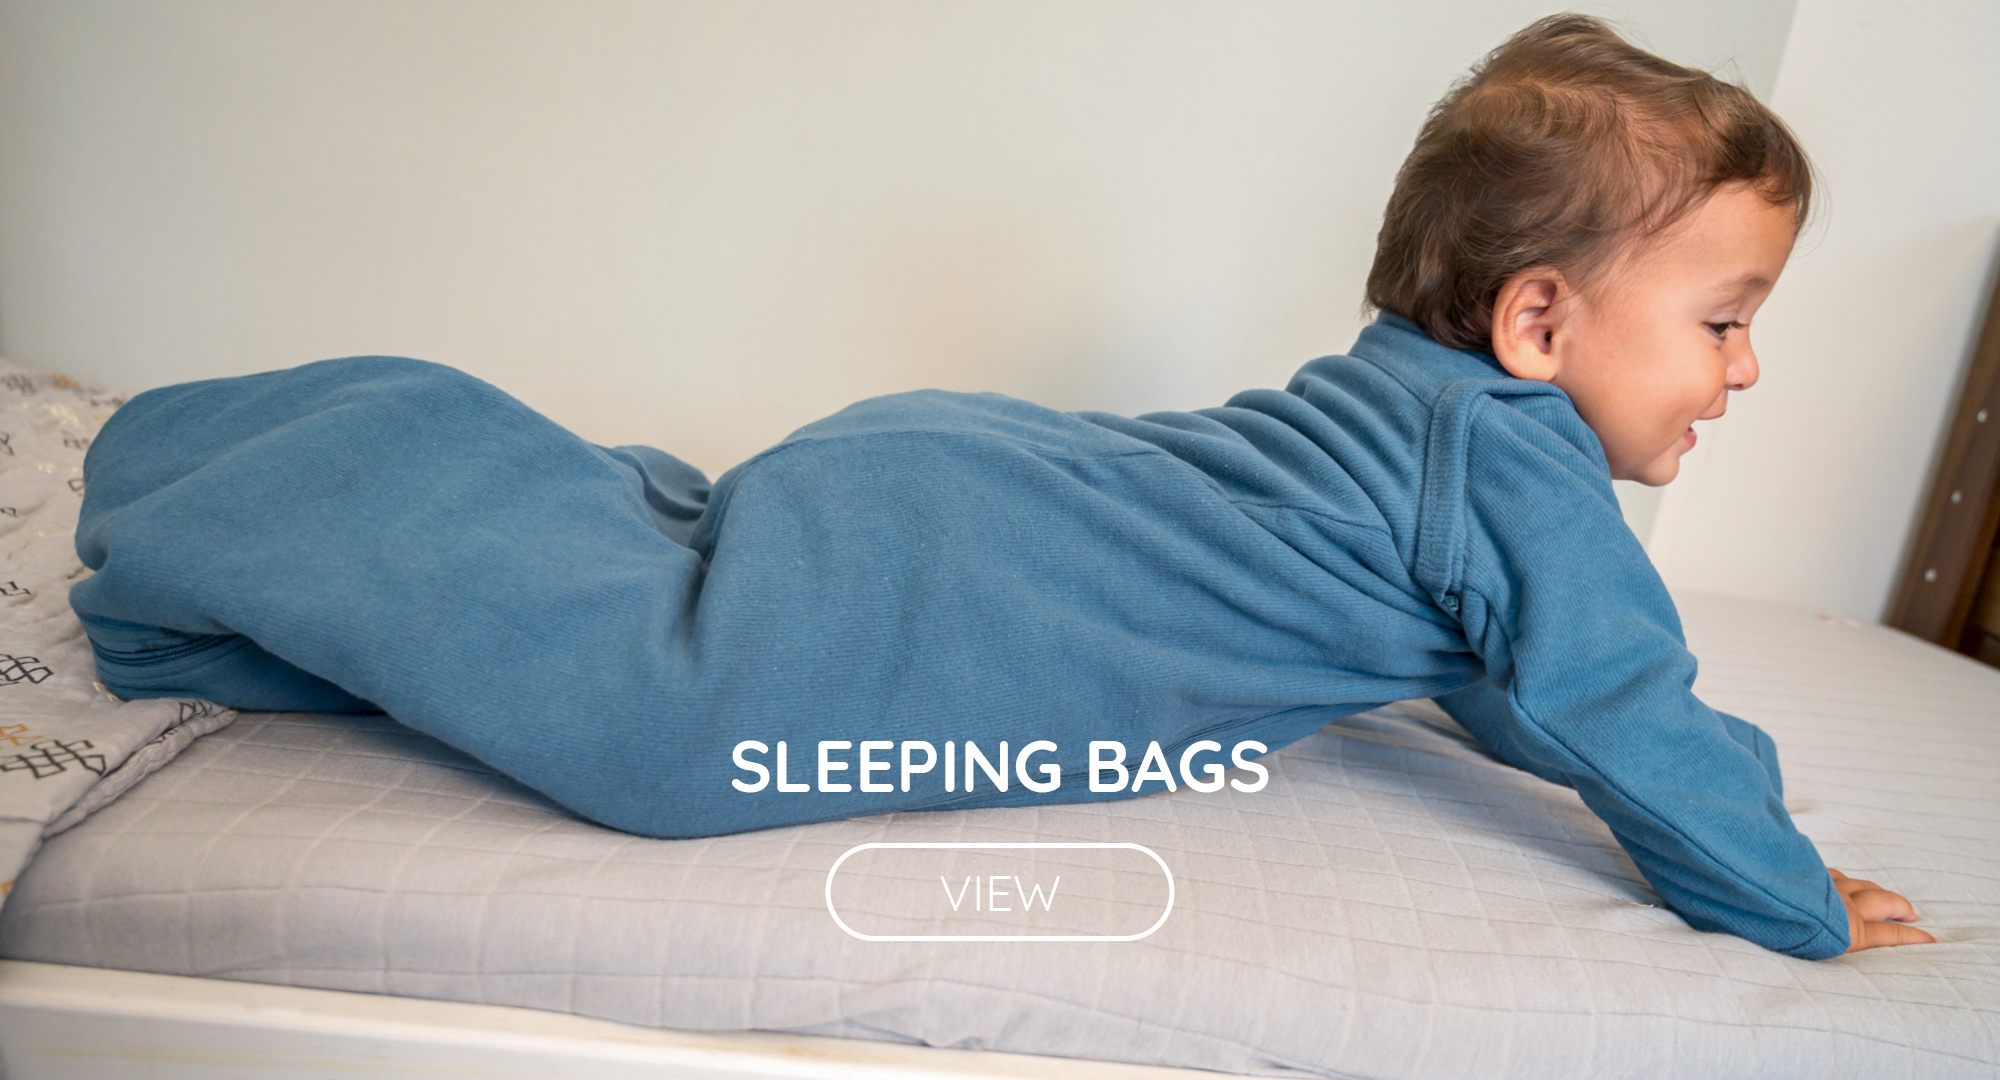 Our warm and comfortable winter sleeping bag with 3.3 TOG is specially designed to give your baby the best sleep